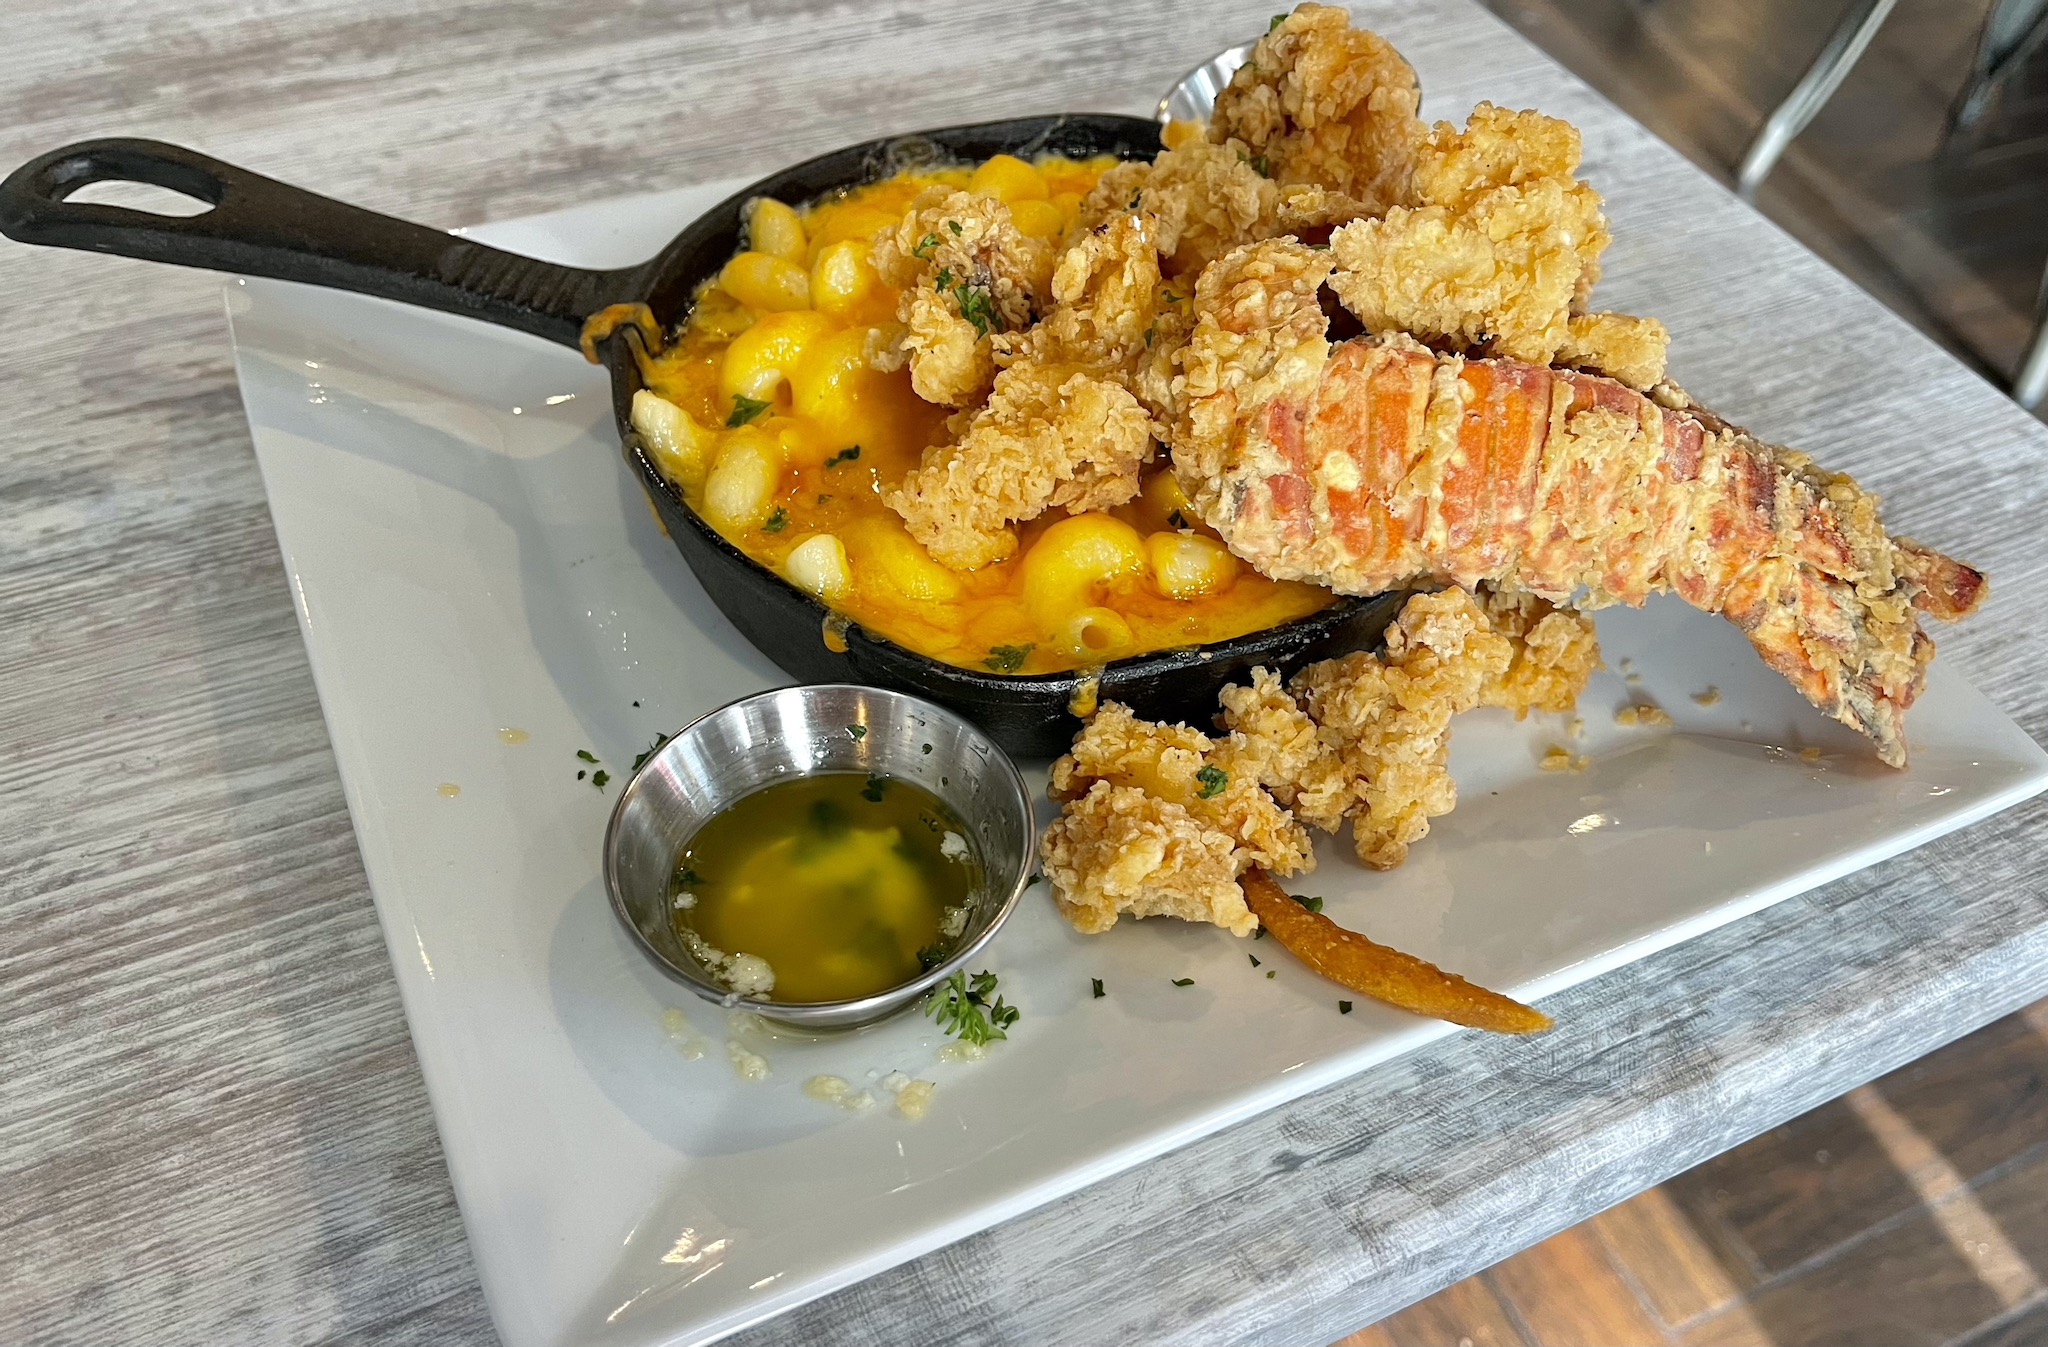 Three Generations Fried Lobster with Smoked Gouda and Cheddar Skillet Mac